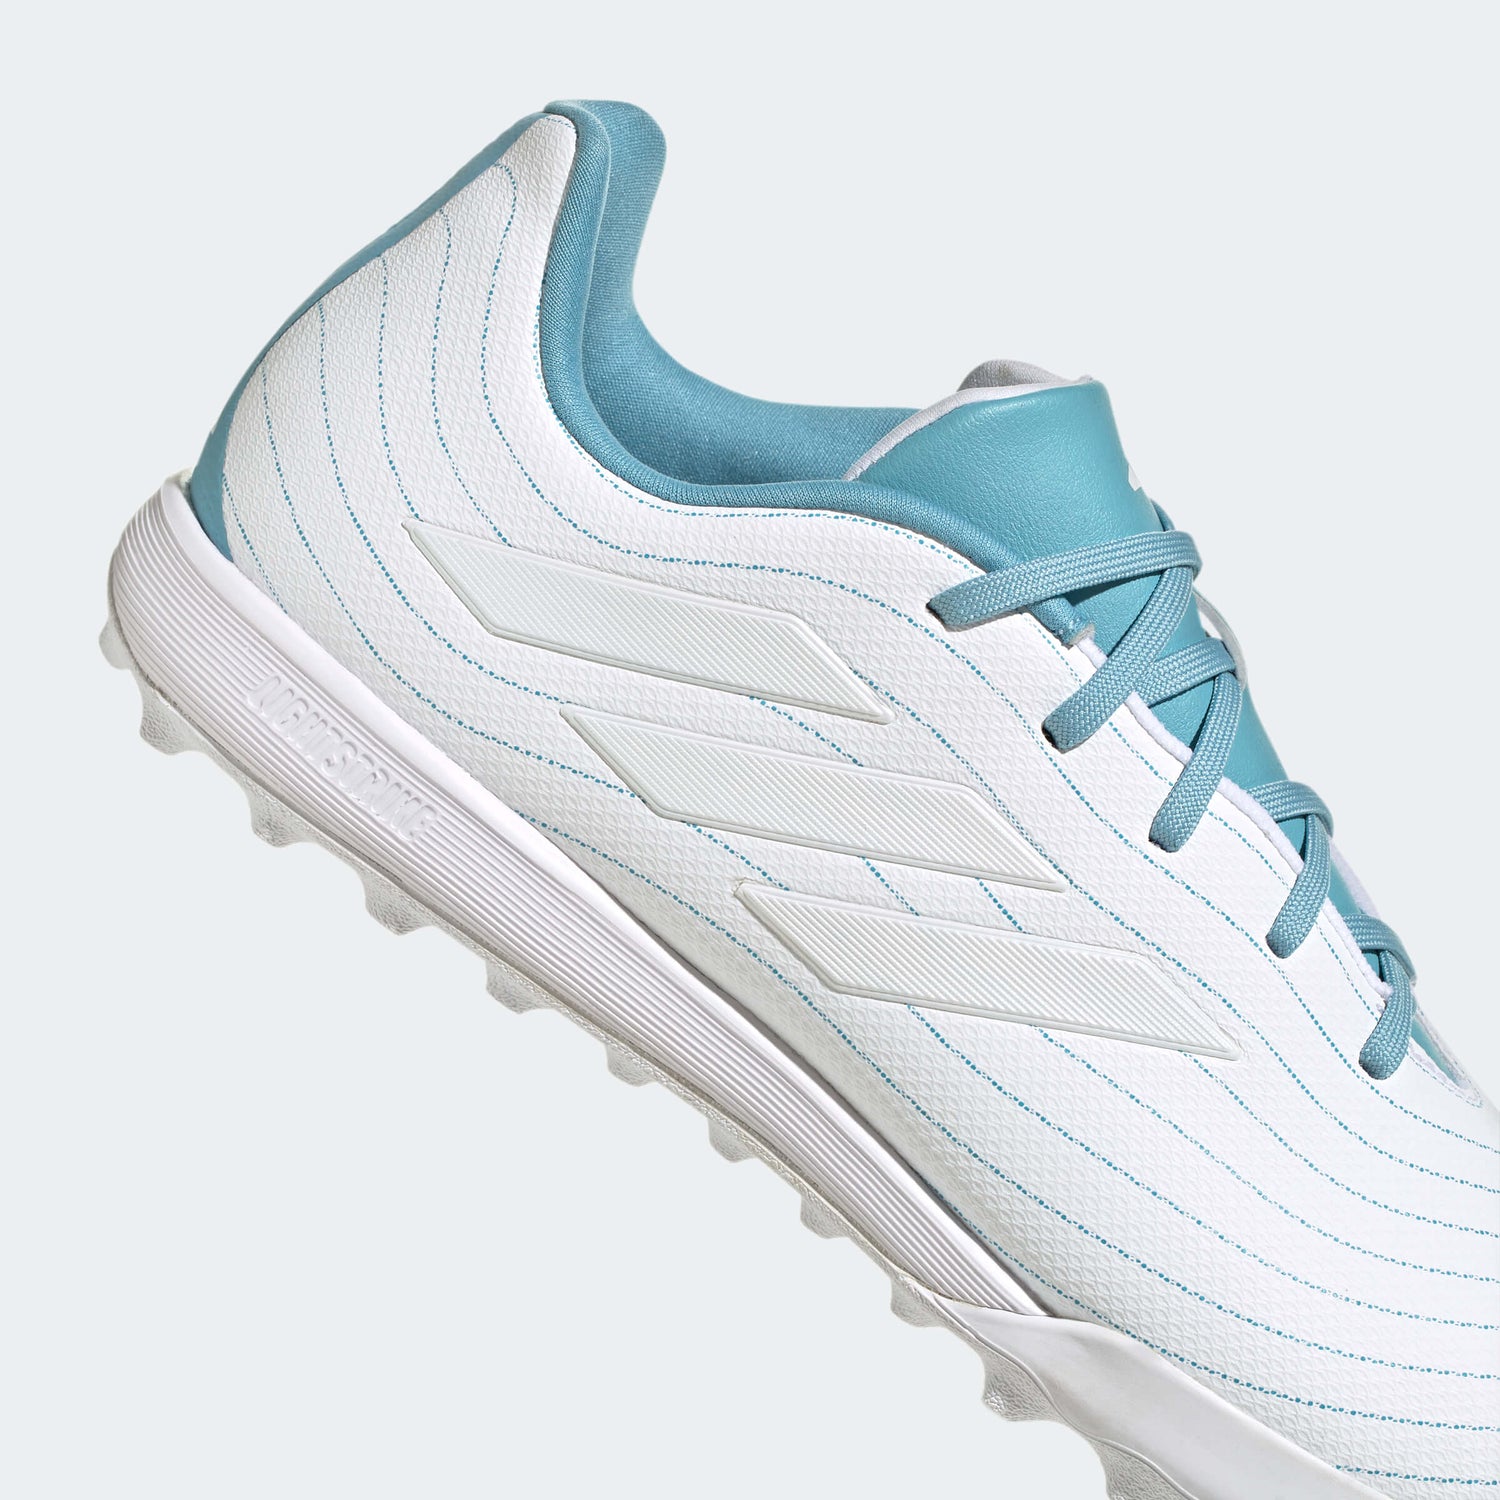 adidas Copa Pure .3 Turf - Parley Pack (SP23) (Detail 1)